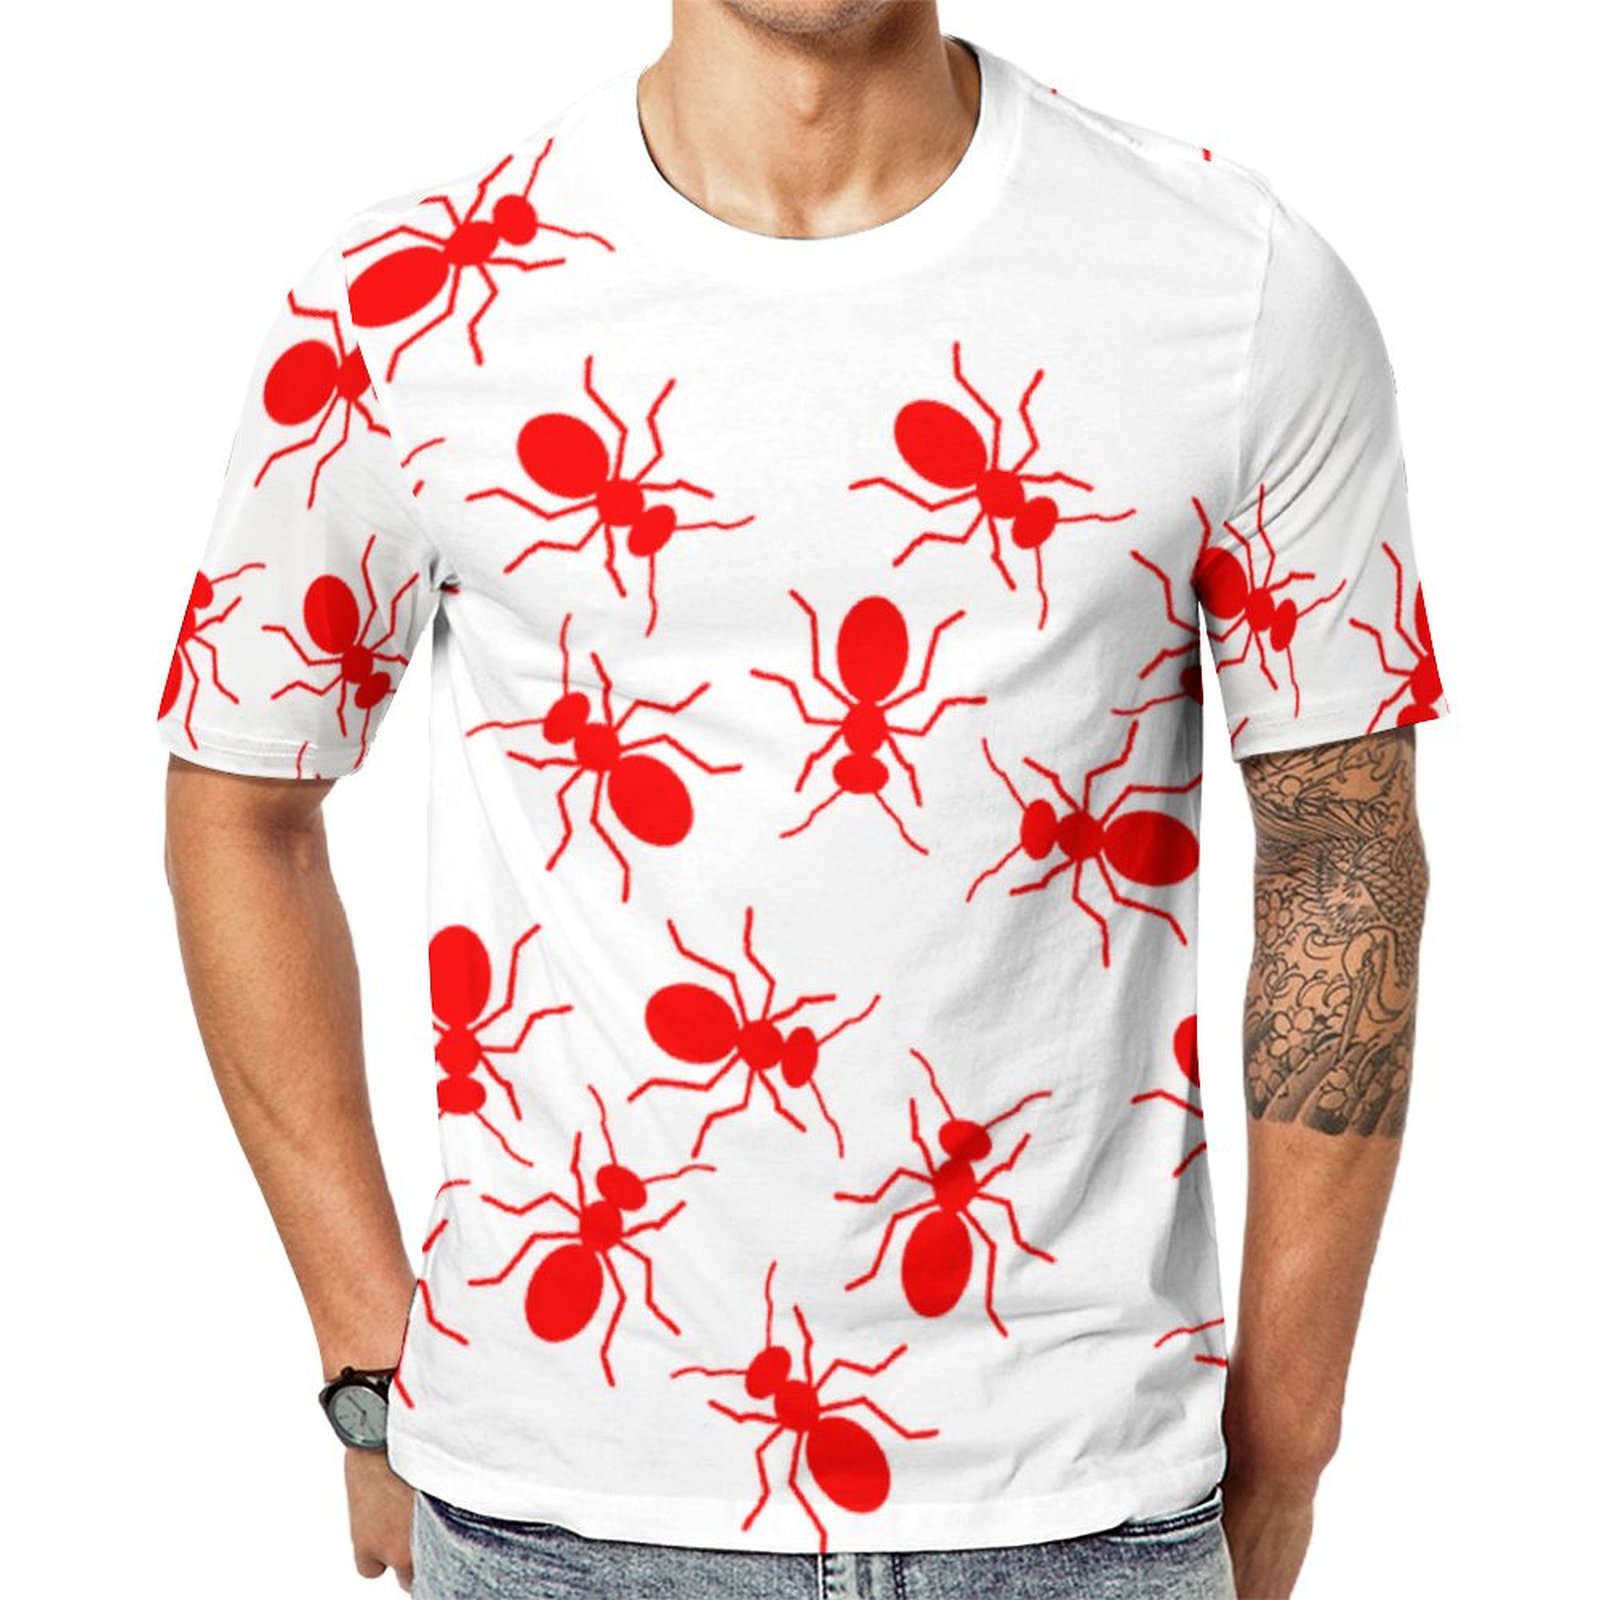 Funny Red Ants On White Short Sleeve Print Unisex Tshirt Summer Casual Tees for Men and Women Coolcoshirts